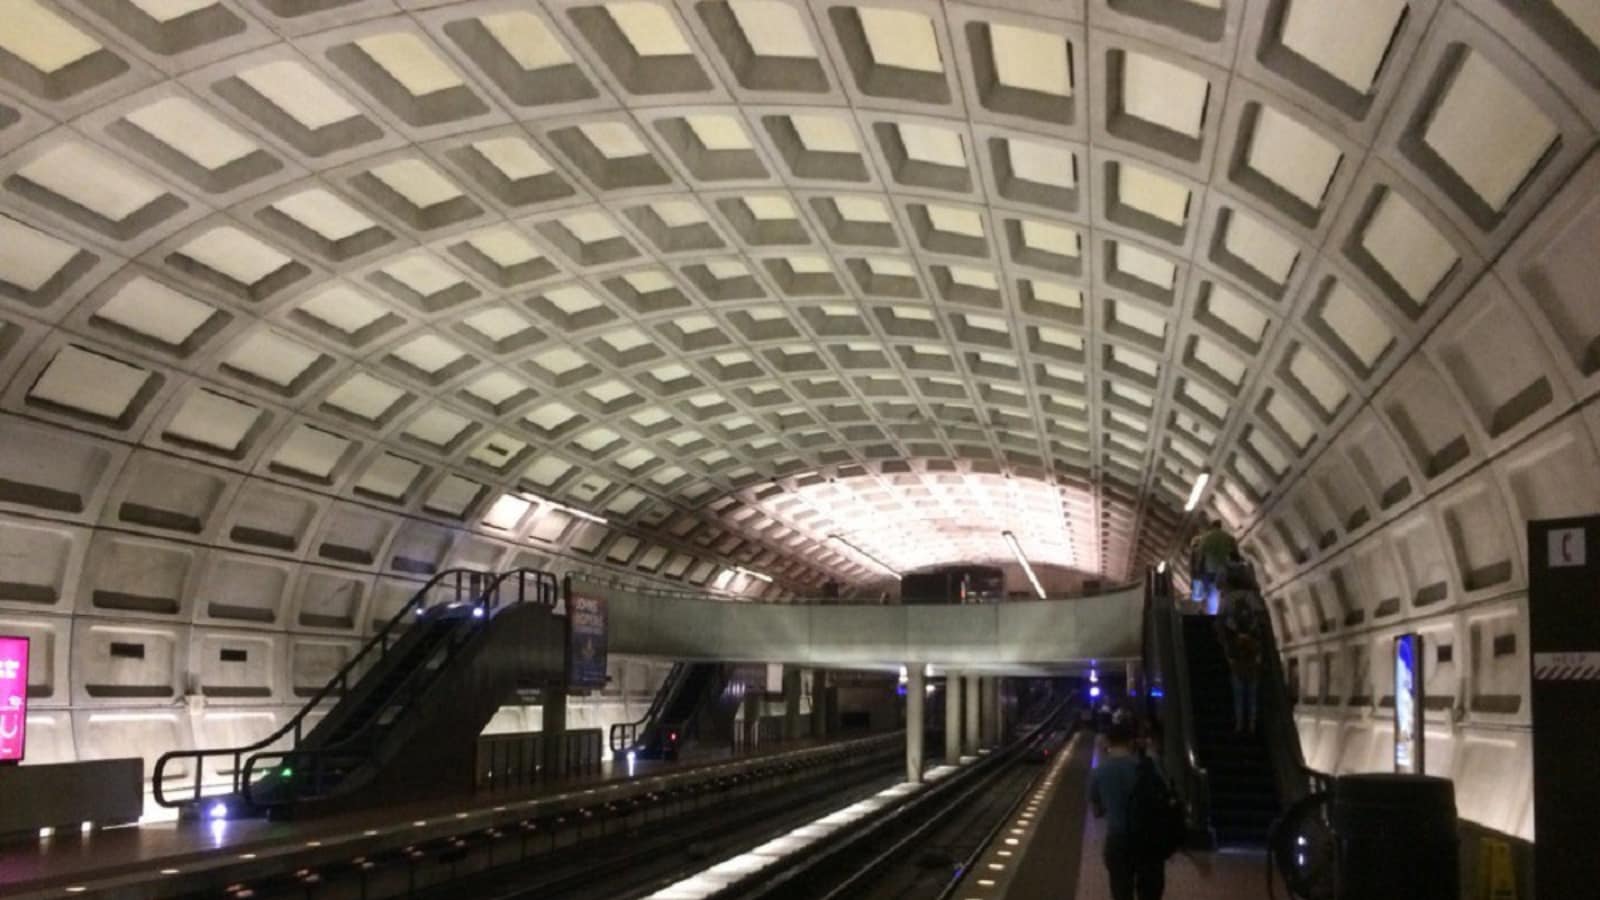 Travel Blogger Visits 97 Metro Stations In Washington DC To Set New Guinness World Record